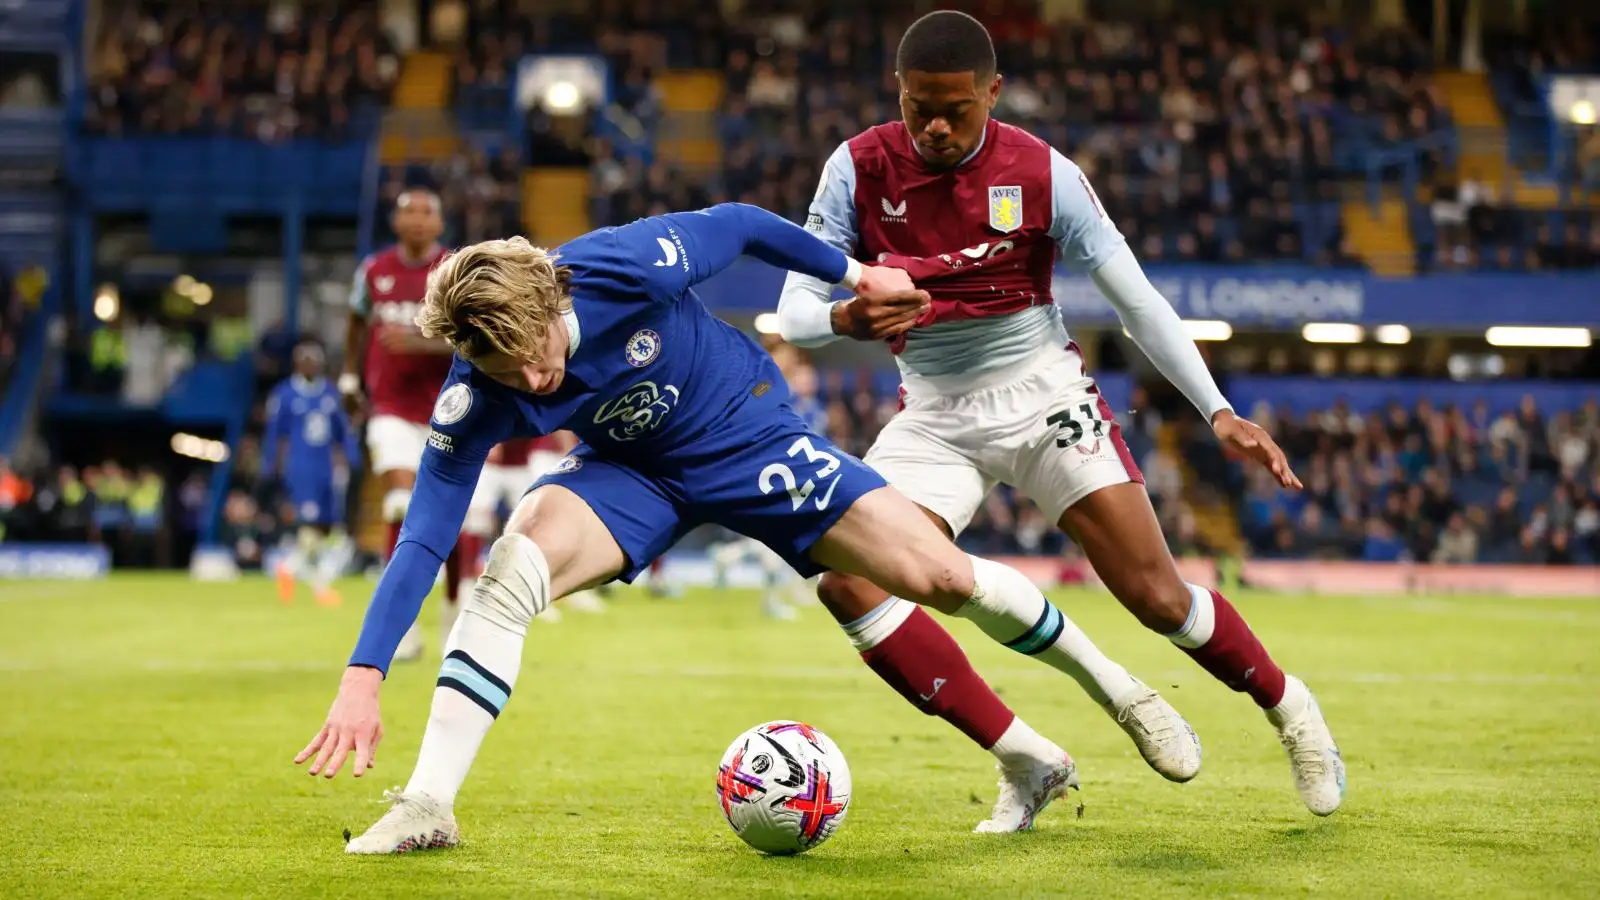 Chelsea midfielder Conor Gallagher battles for the ball